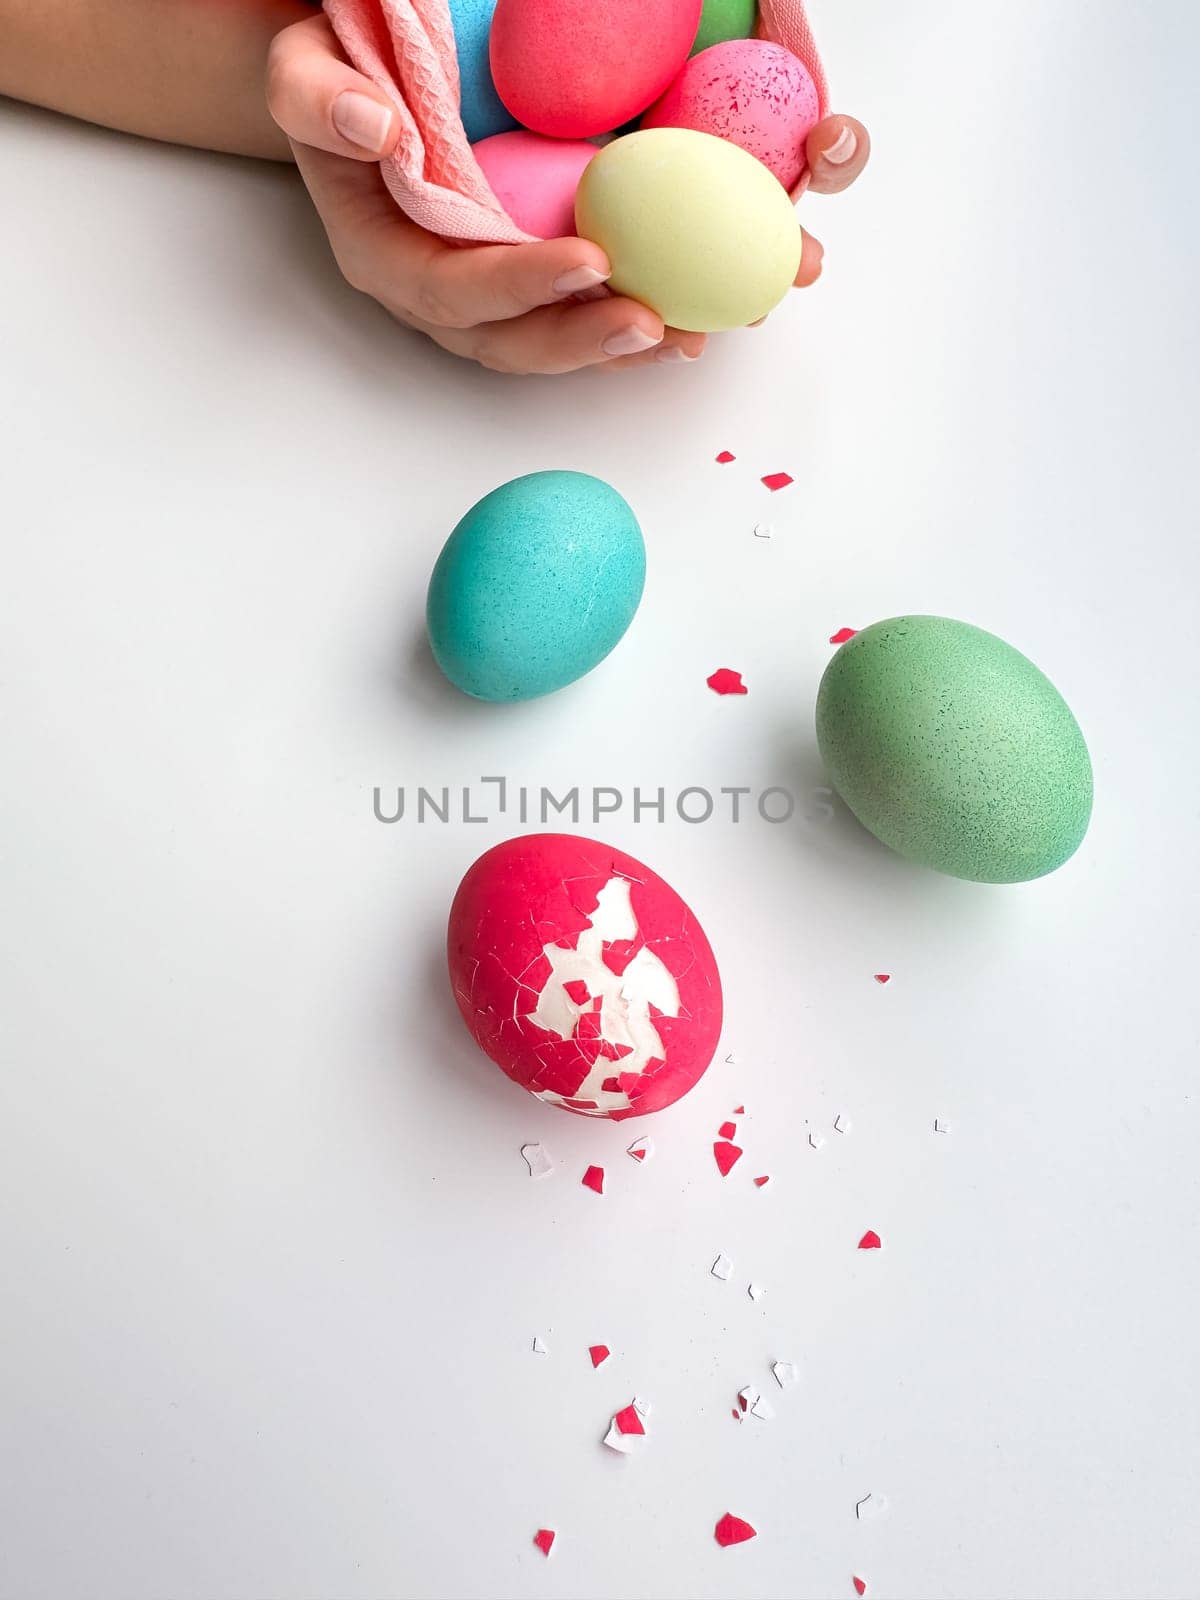 Hands holding colorful painted Easter eggs with one cracked egg on the side, representing Easter festivities, spring celebrations, and family fun activities. by Lunnica